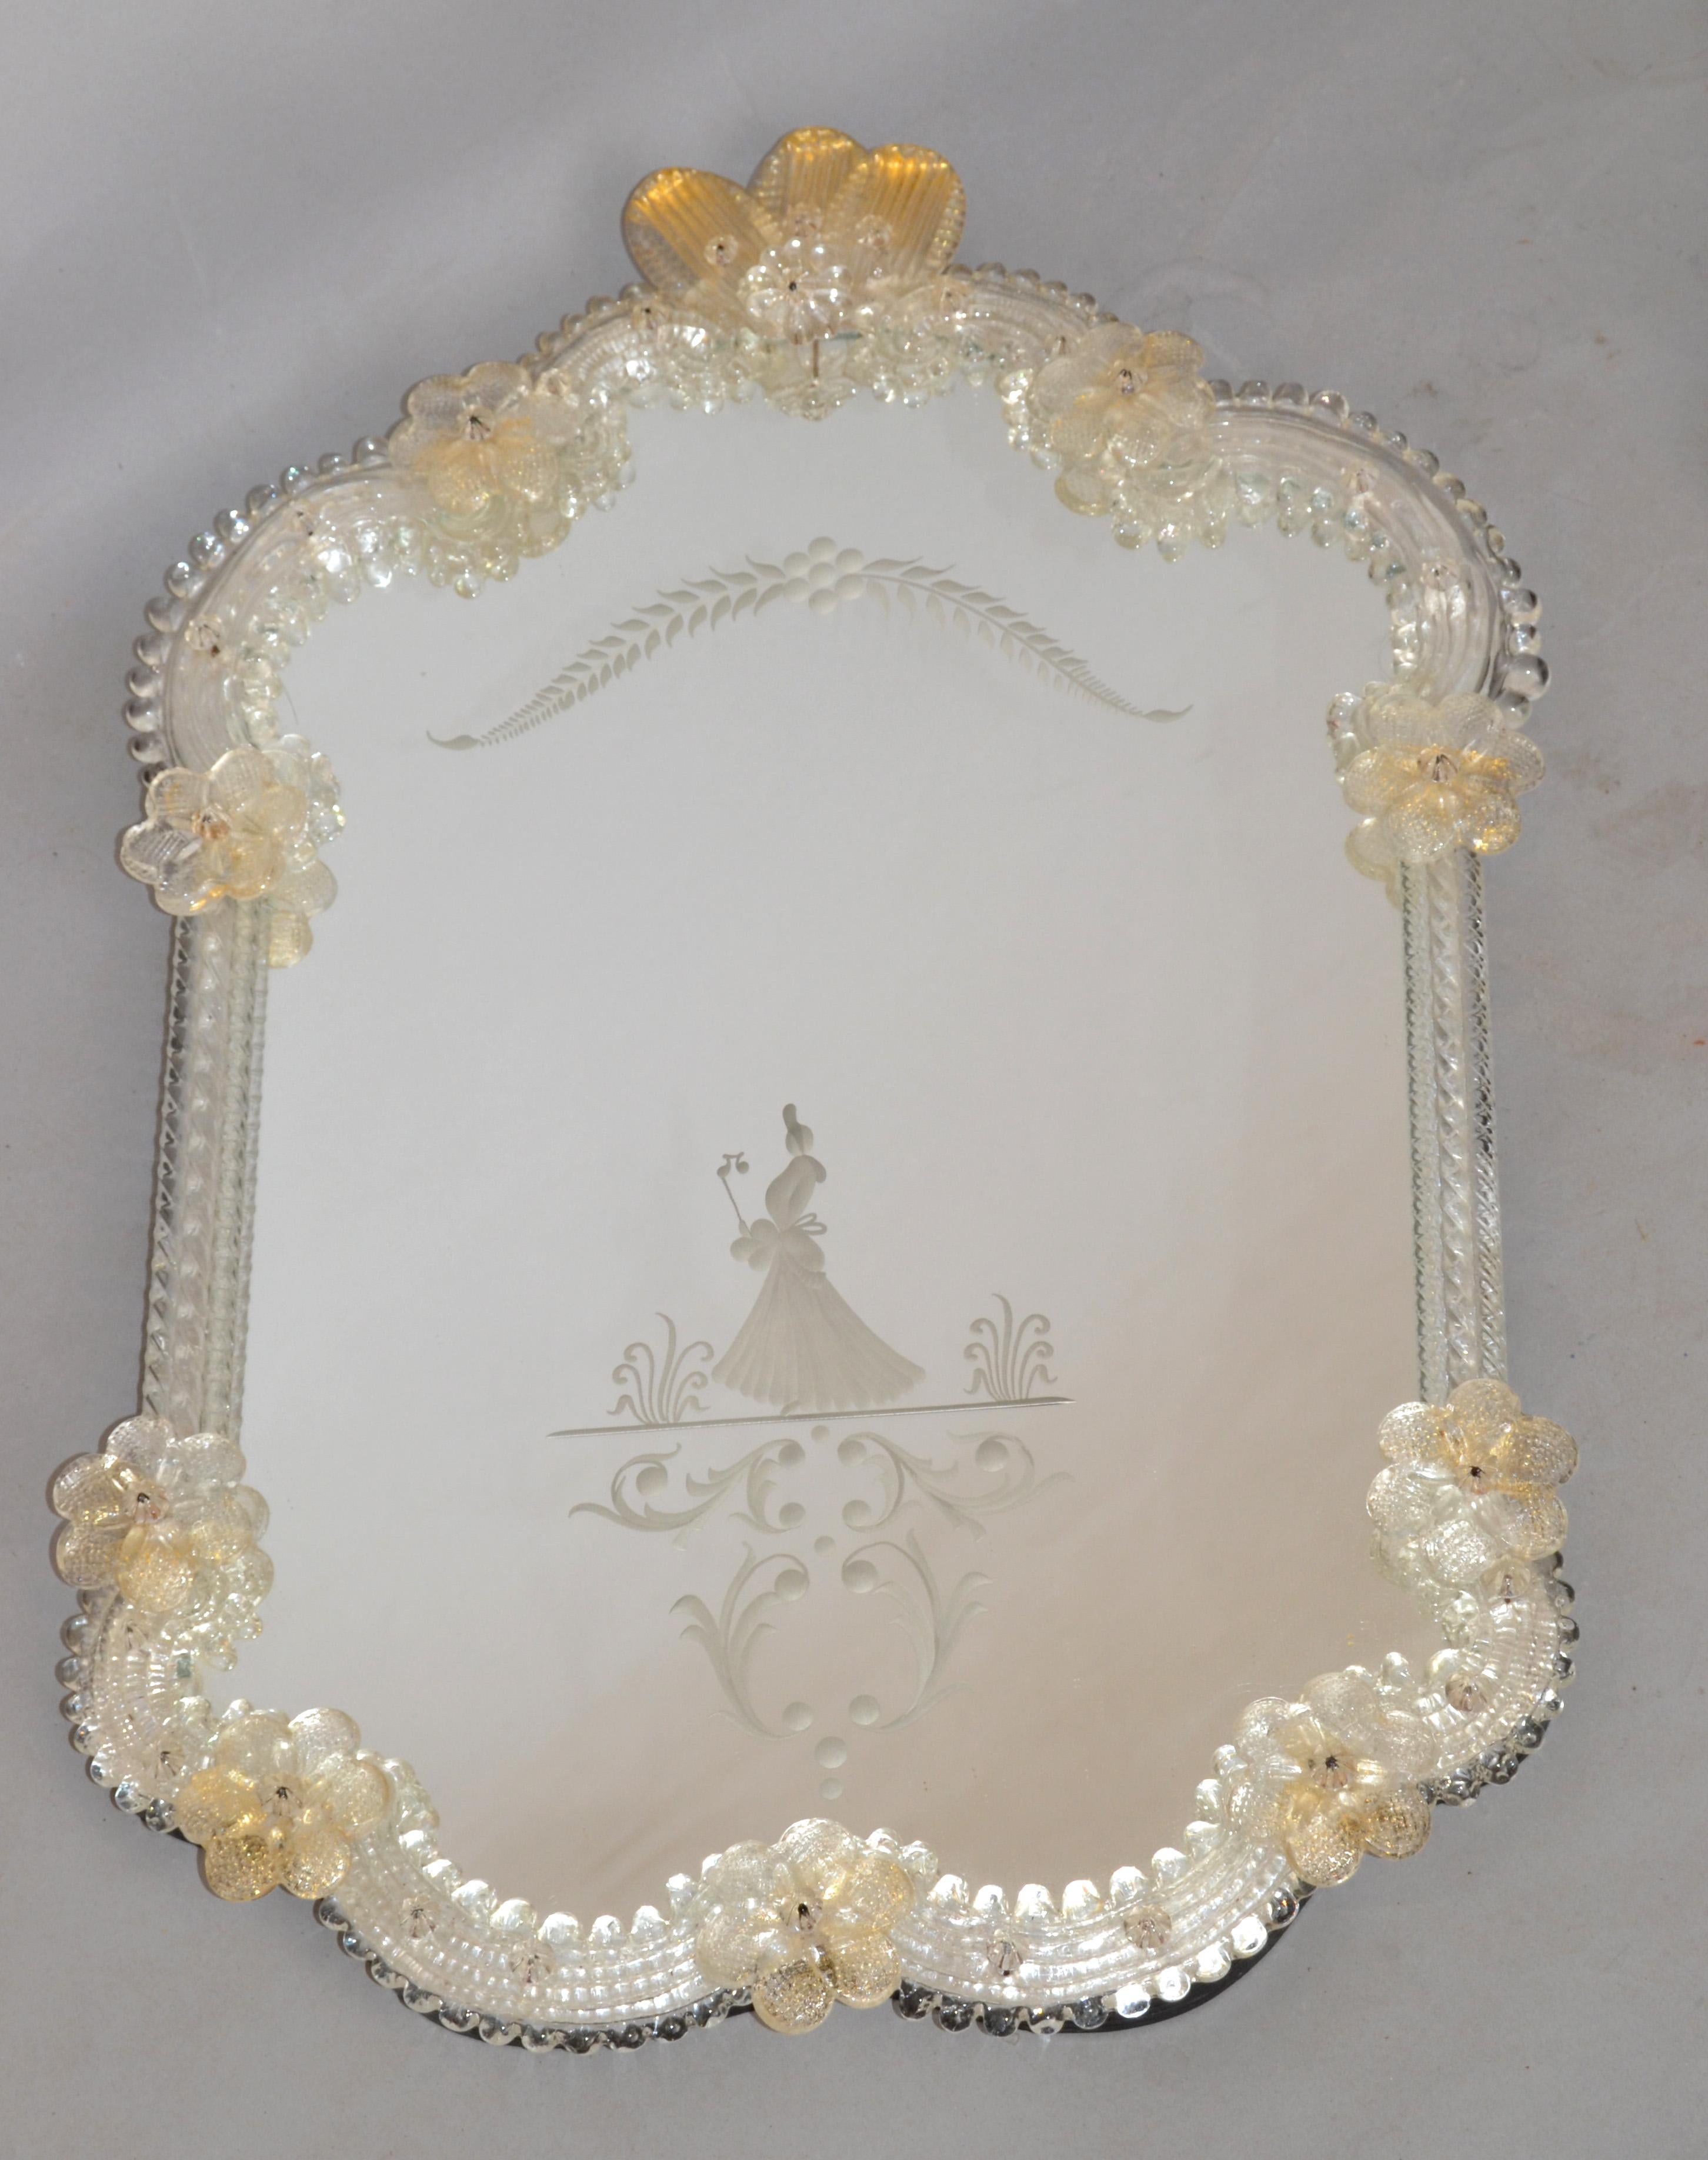 Rococo Revival Him and Her Etched Venetian Wall Mirror Bohemian Golden Flowers For Sale 1